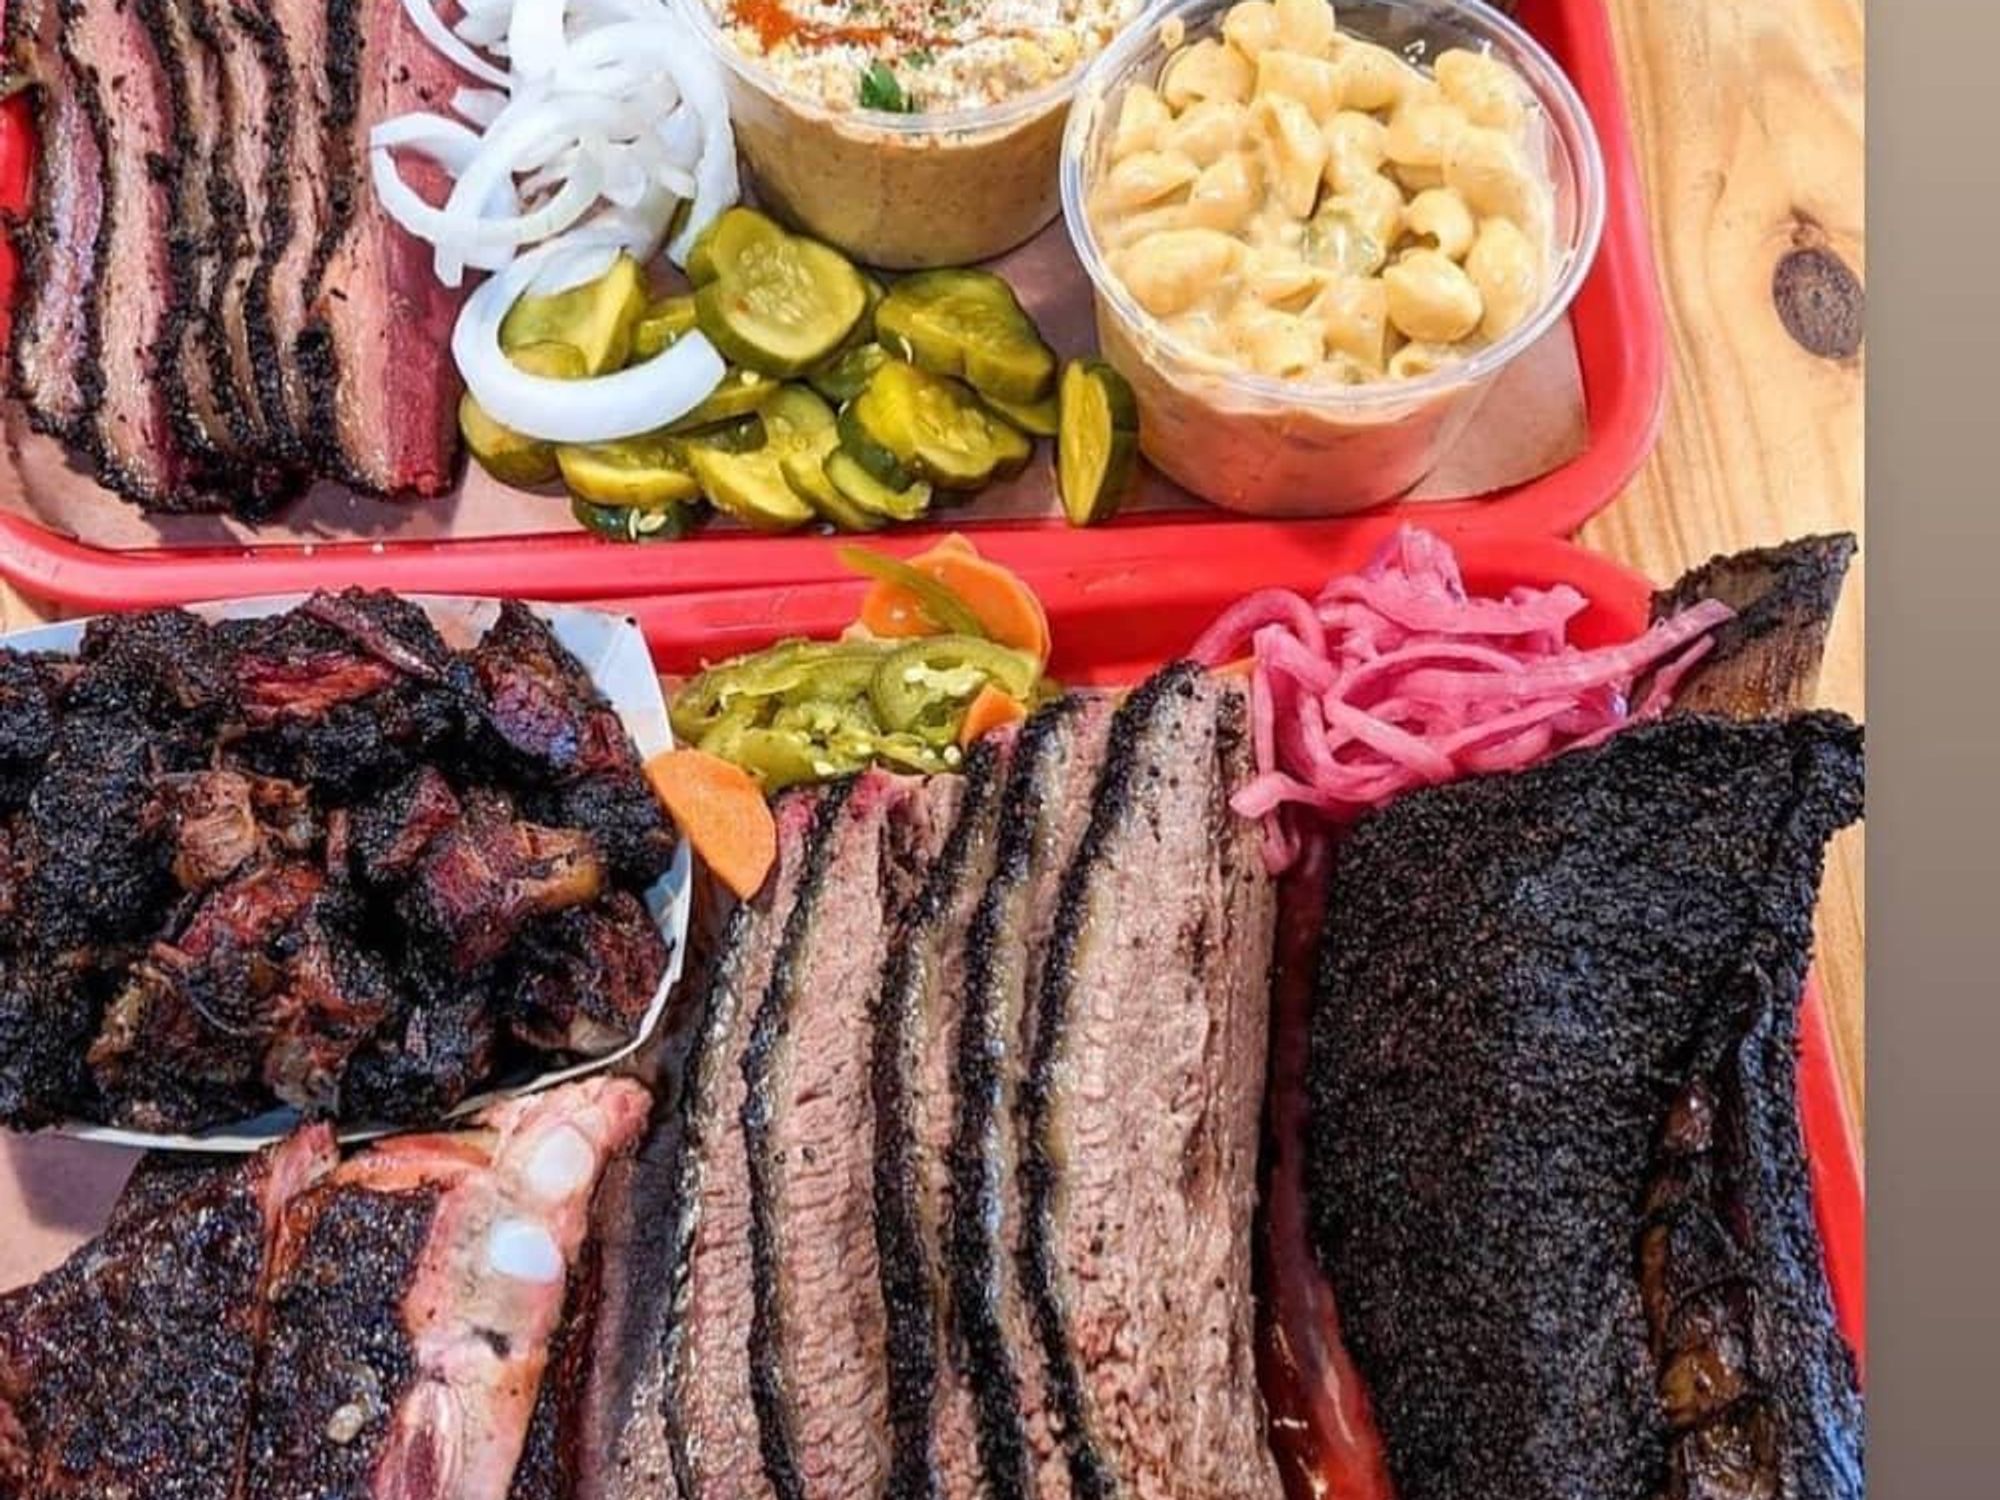 https://dallas.culturemap.com/media-library/cattleack-barbeque-barbecue-bbq-tray.jpg?id=31488991&width=2000&height=1500&quality=85&coordinates=0%2C125%2C0%2C125